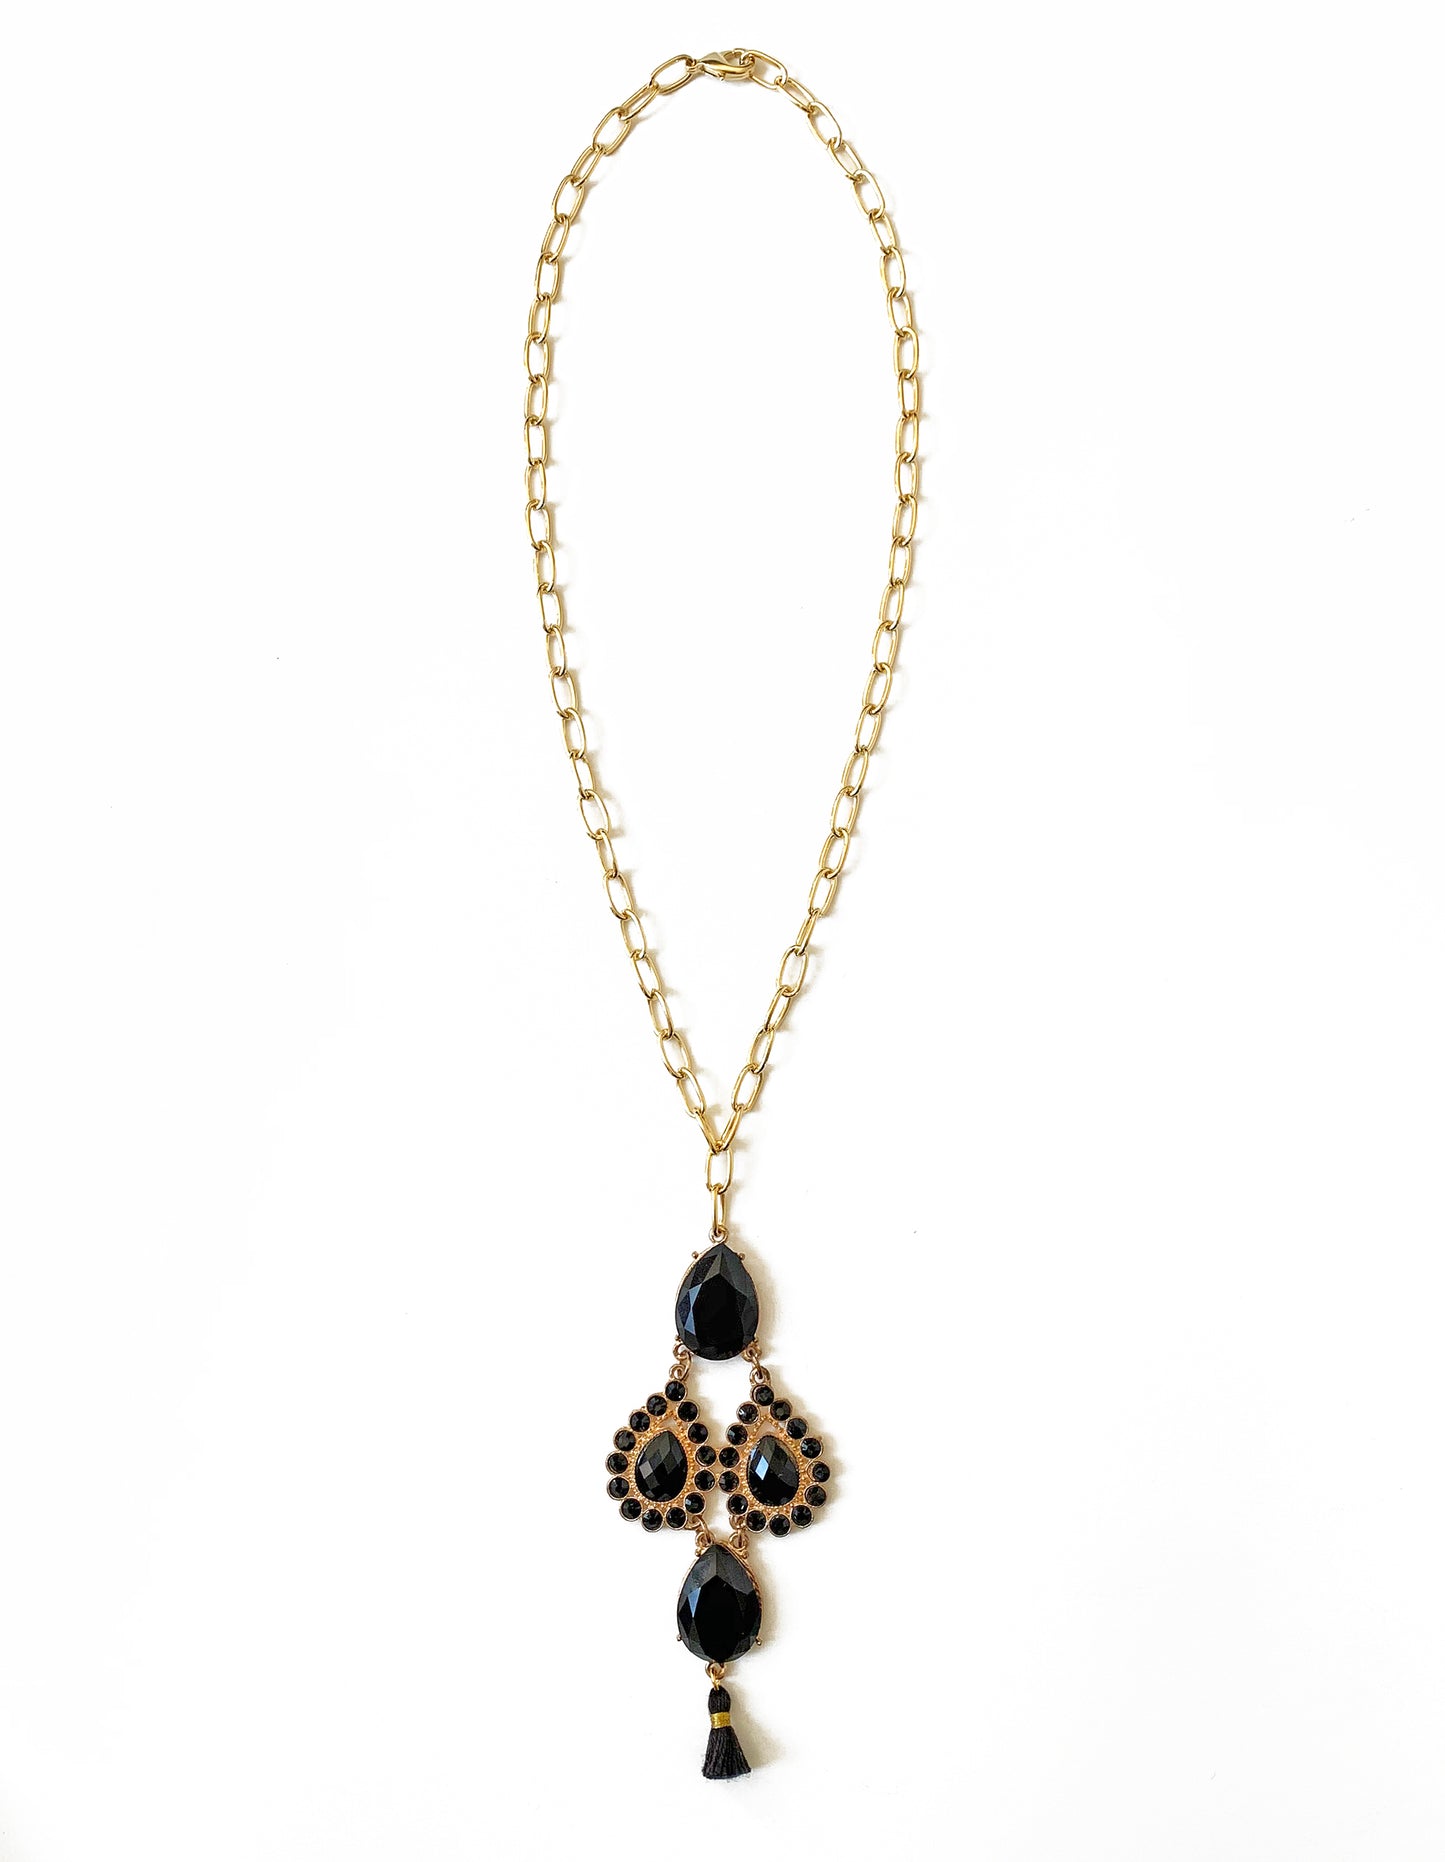 Black Beaded Chandelier Necklace with Tassel, 18K Gold Plated Paperclip Chain